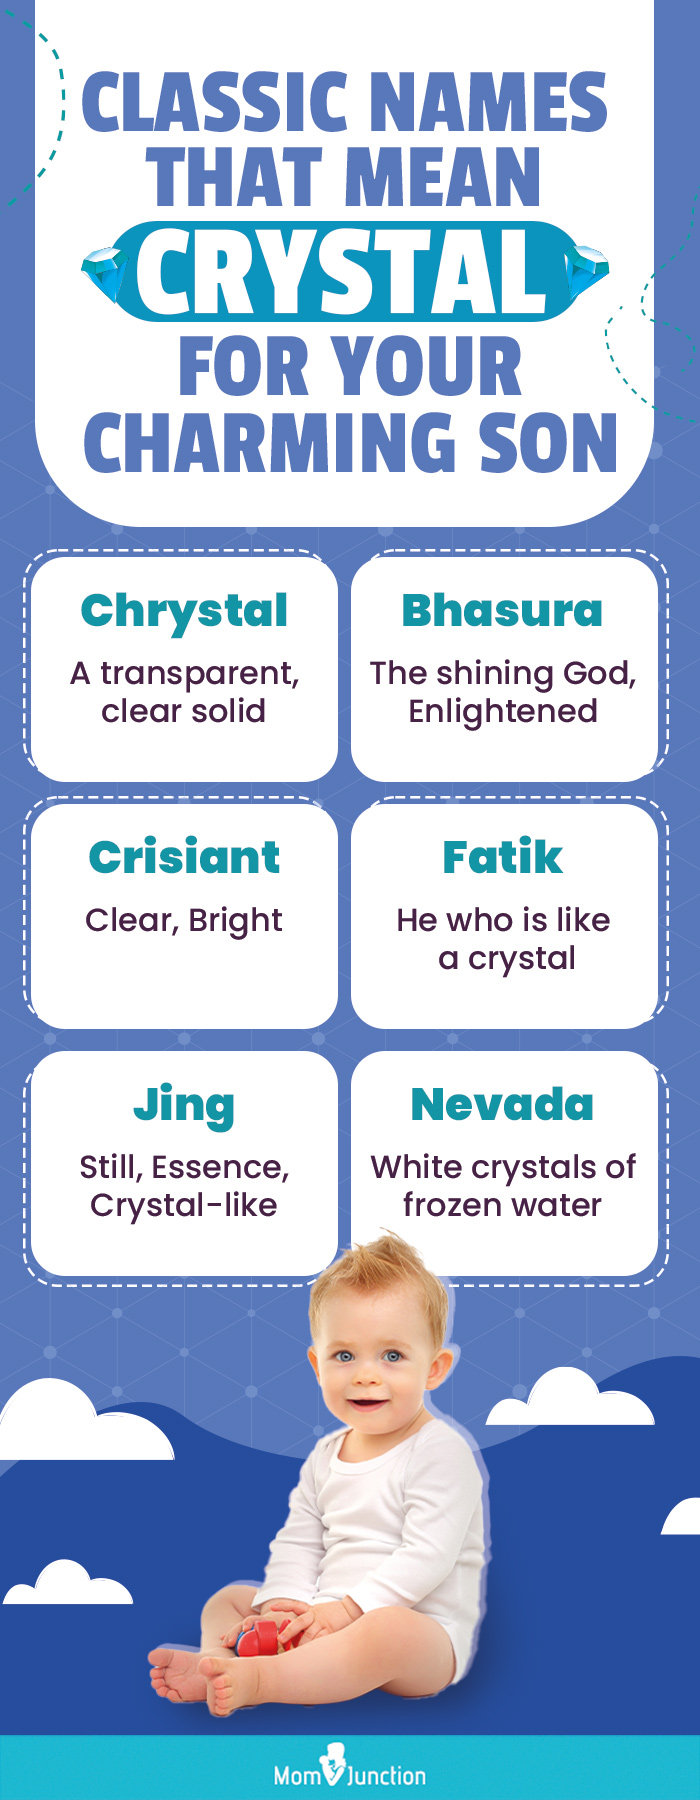 classic names that mean crystal for your charming son (infographic)